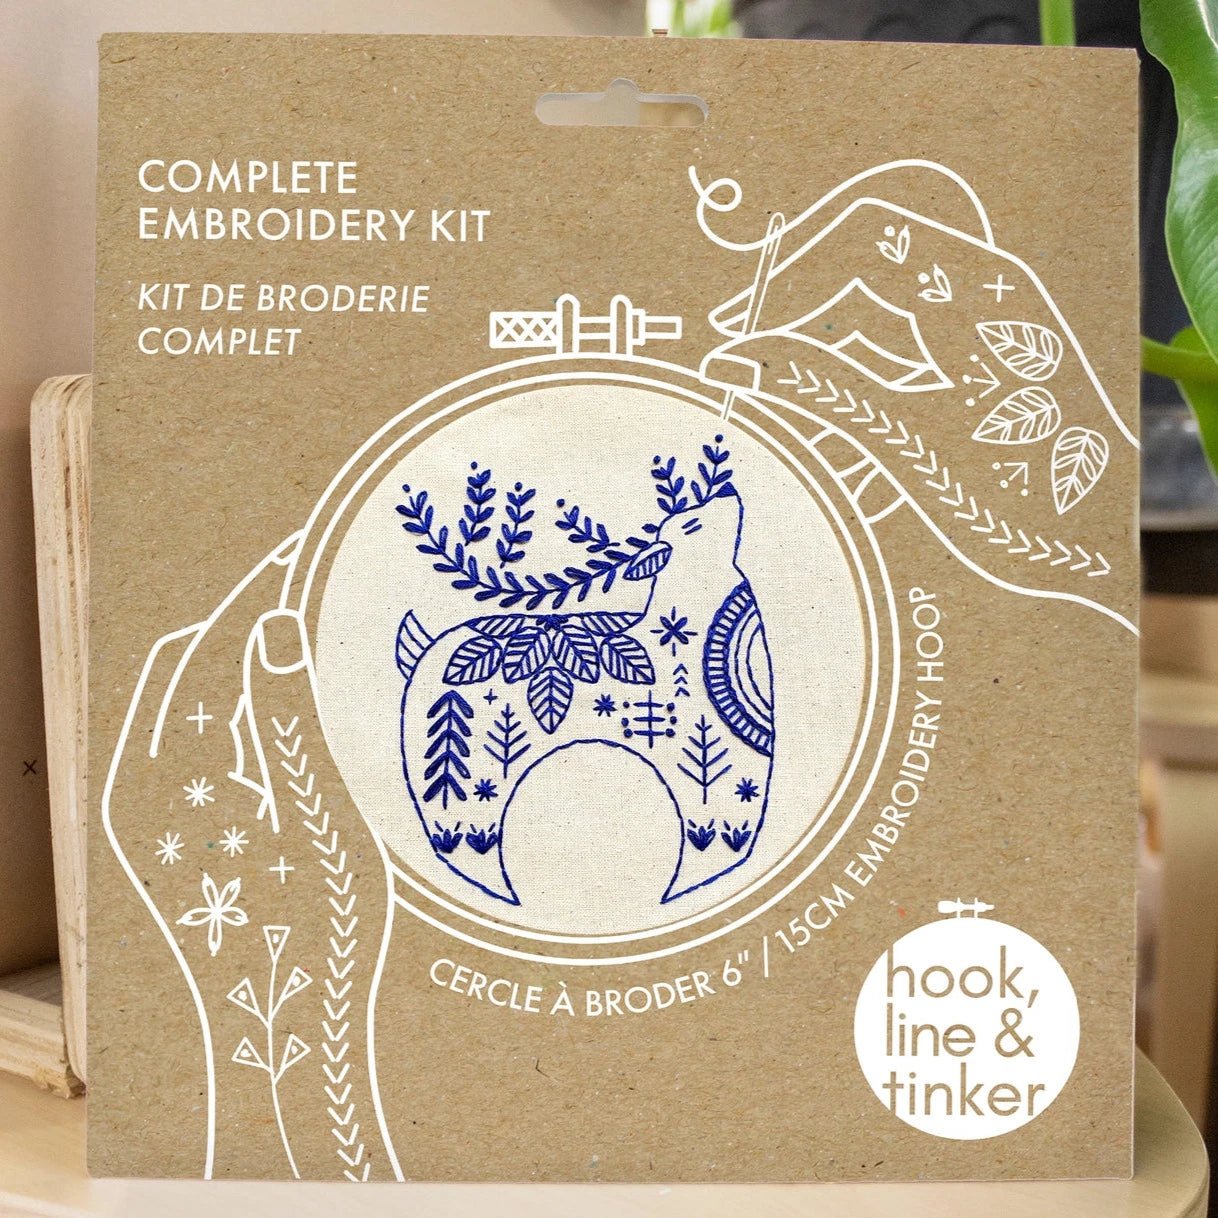 Hygge Reindeer Complete Embroidery Kit - Hook, Line, & Tinker Embroidery Kits - The Little Yarn Store